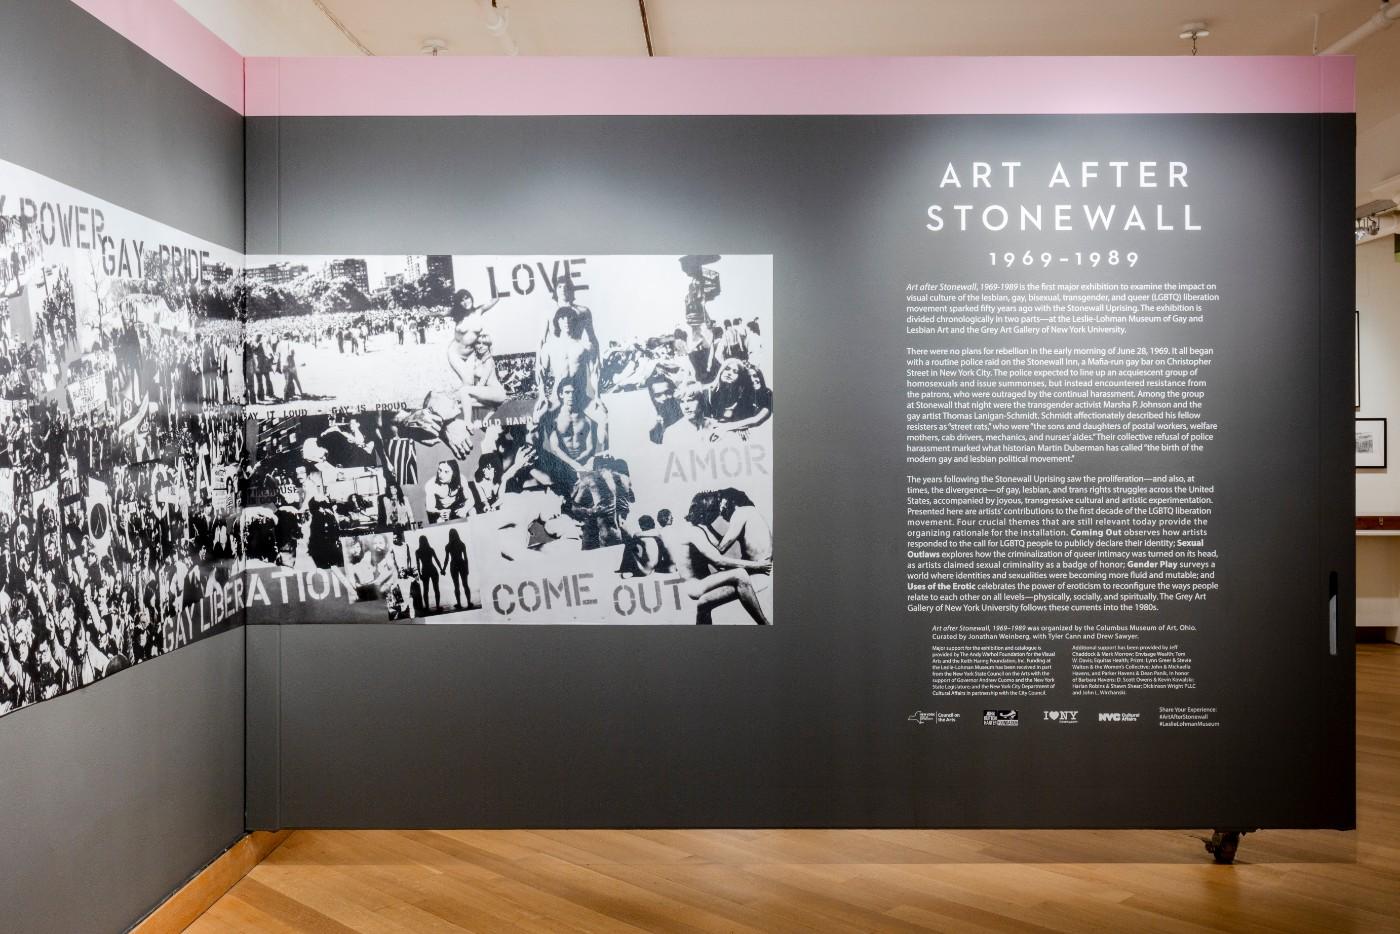 Installation view, Art after Stonewall, Leslie-Lohman Museum of Gay and Lesbian Art